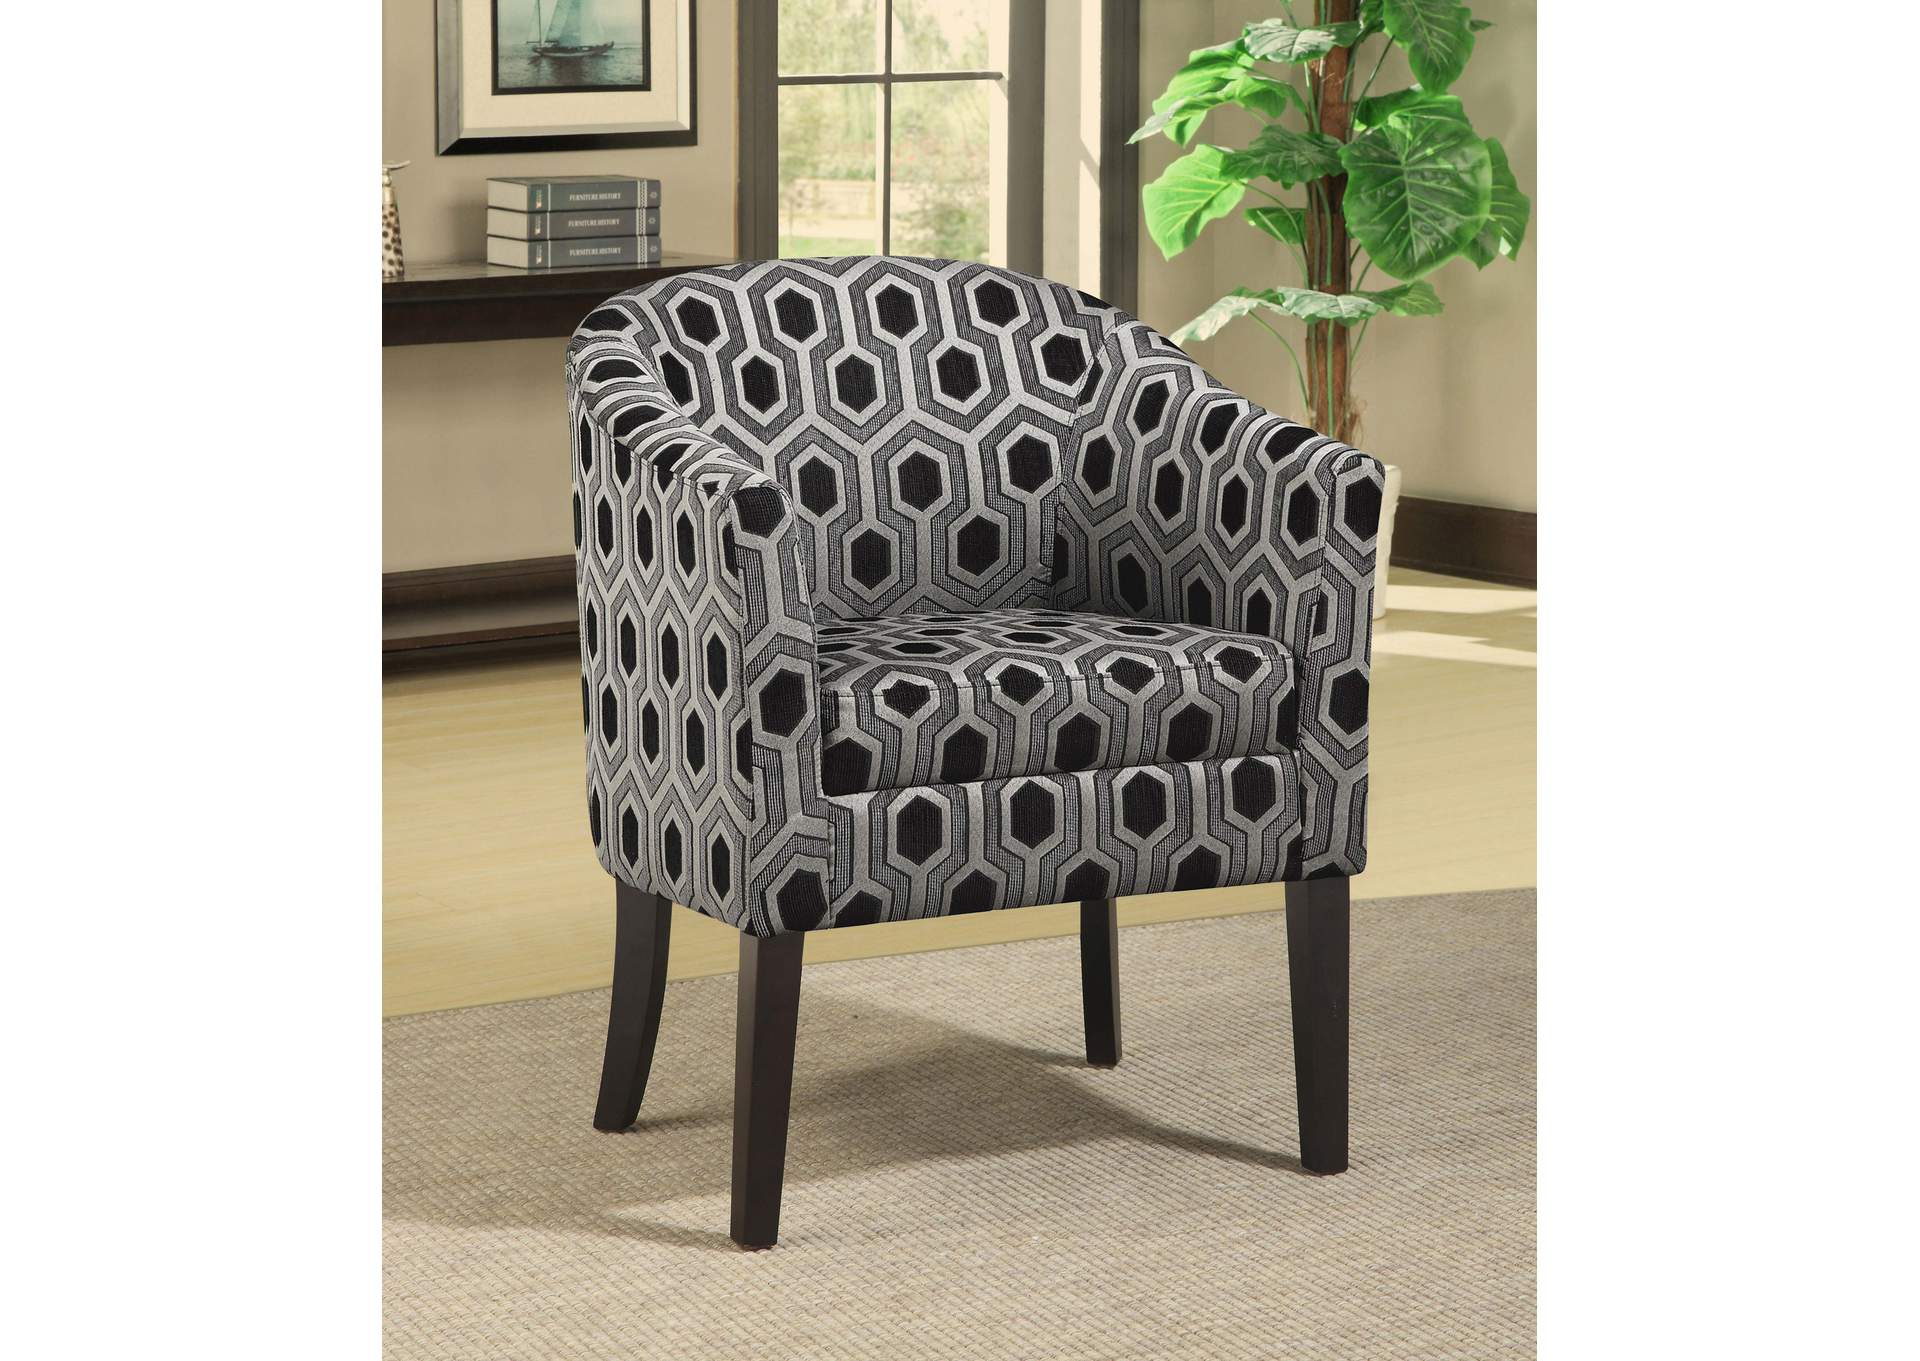 Jansen Hexagon Patterned Accent Chair Grey and Black,Coaster Furniture